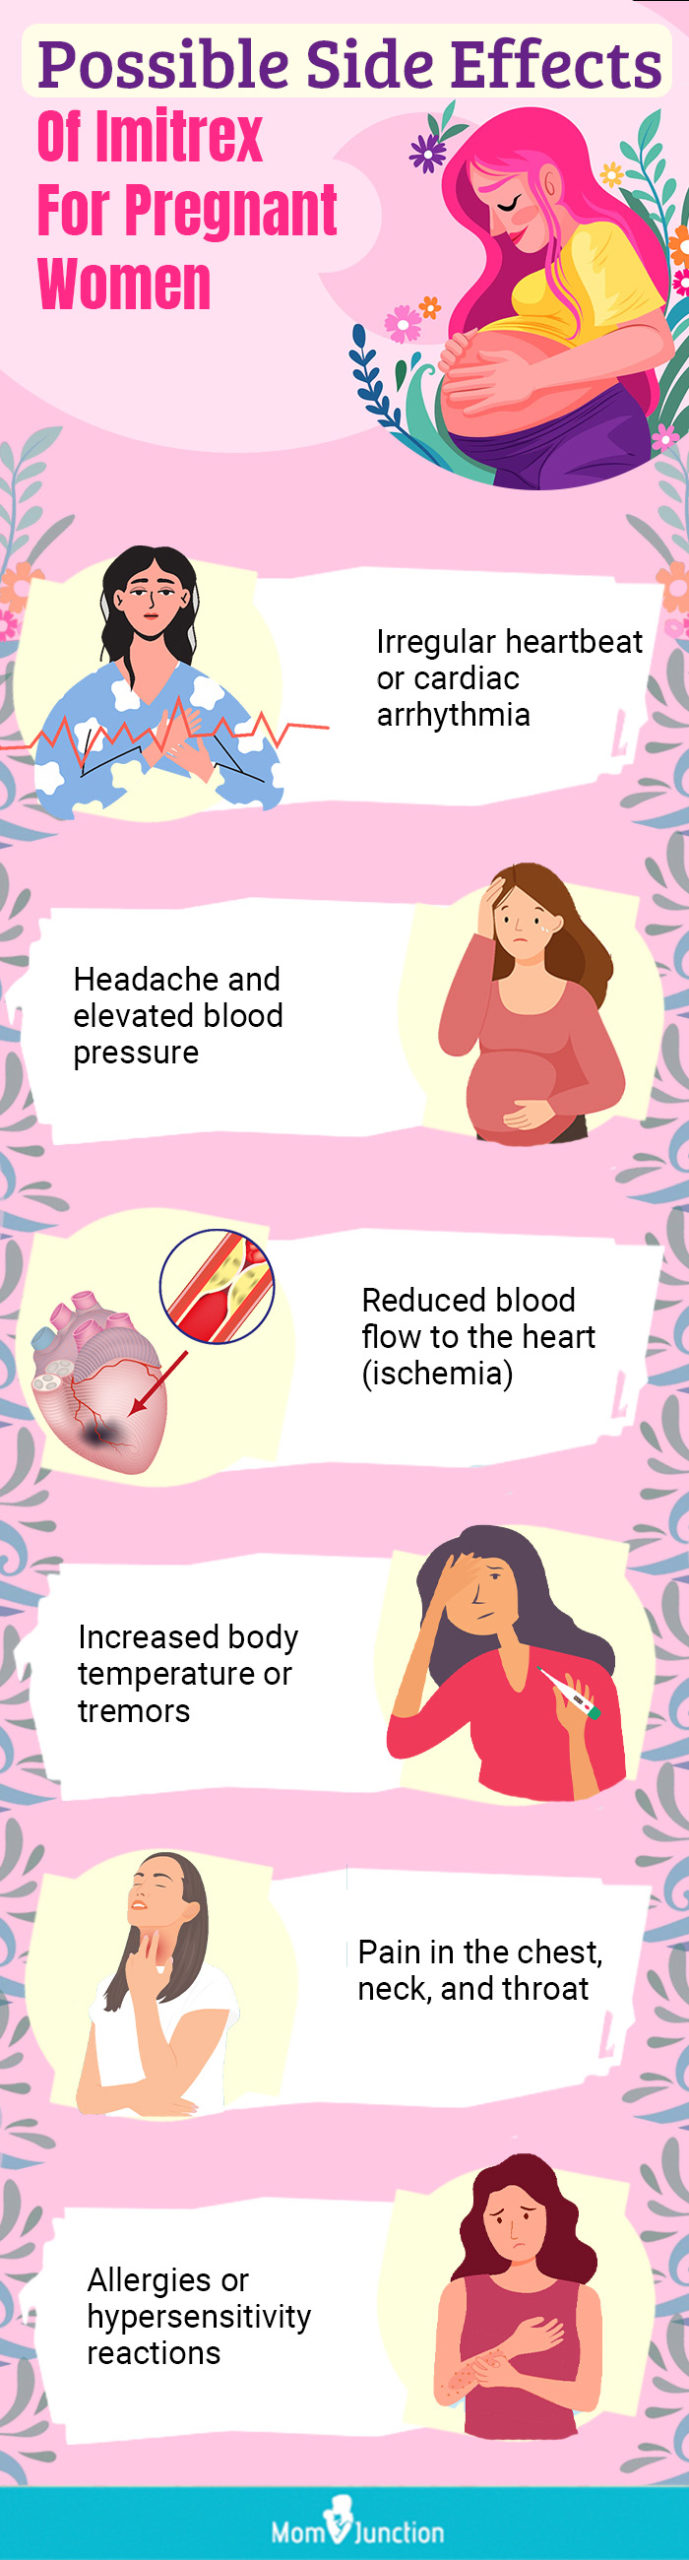 possible side effects of imitrex for pregnant women recovered (infographic)